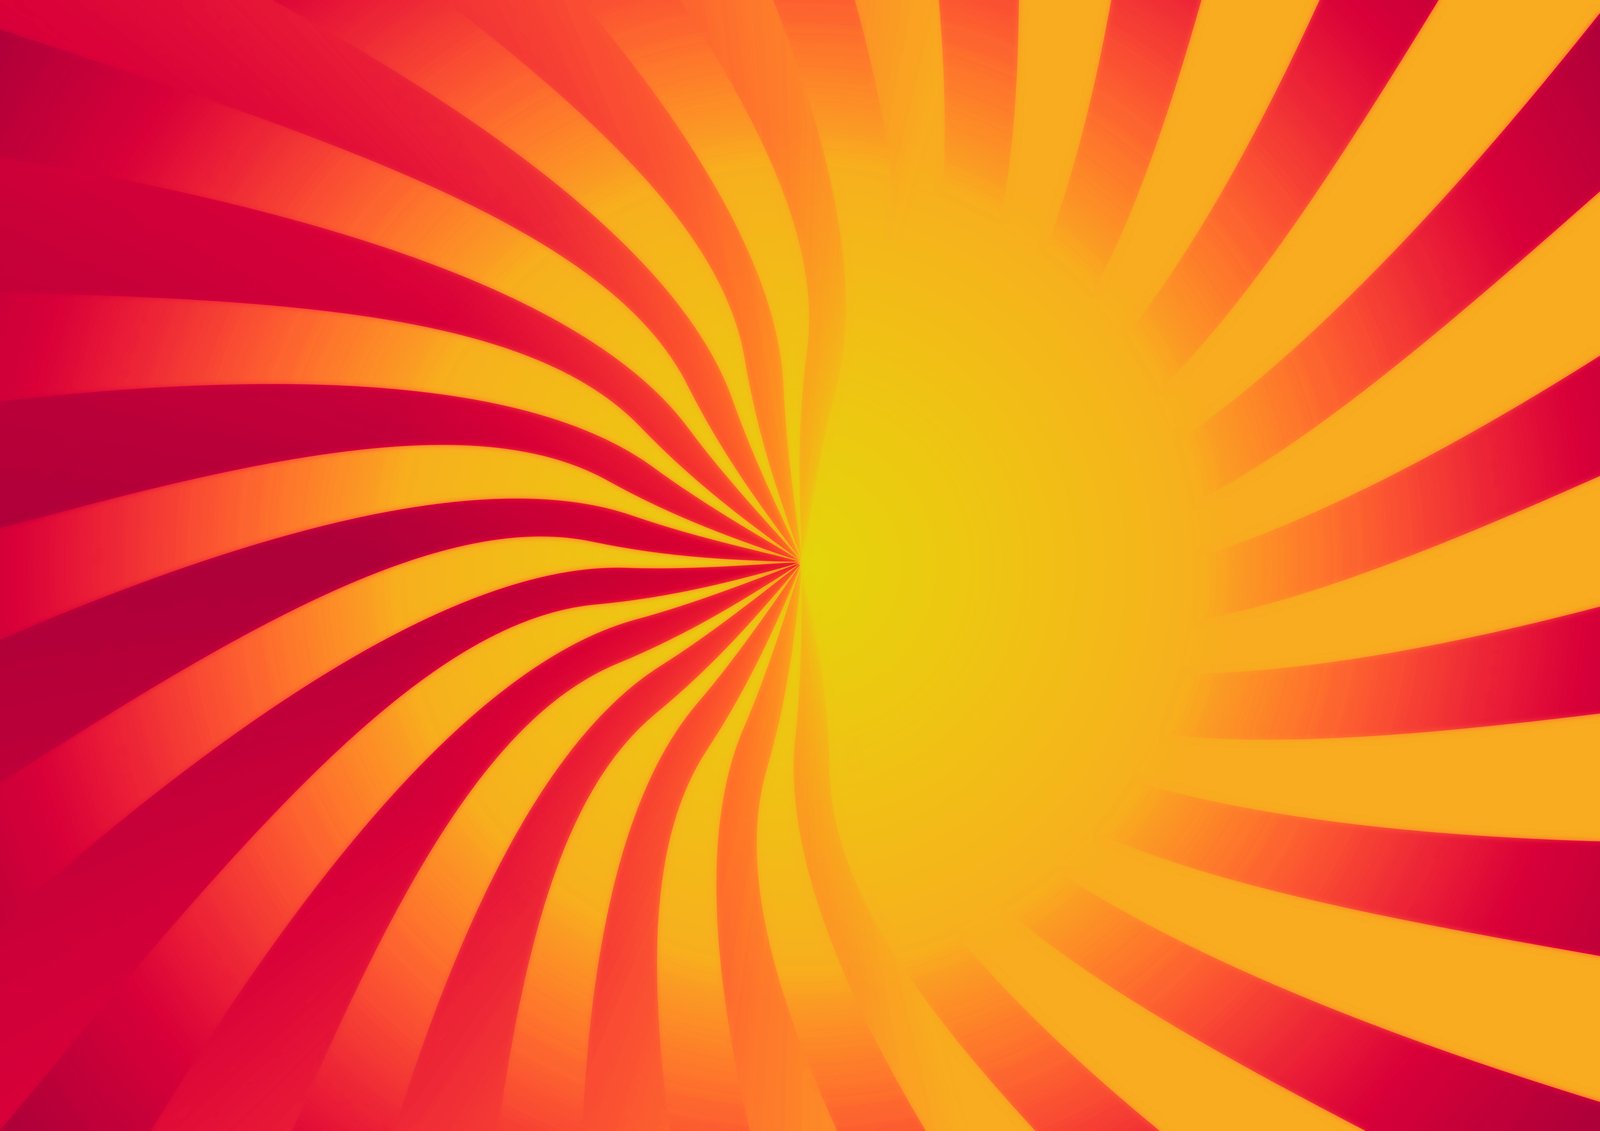 a yellow and red swirl pattern with a dark center